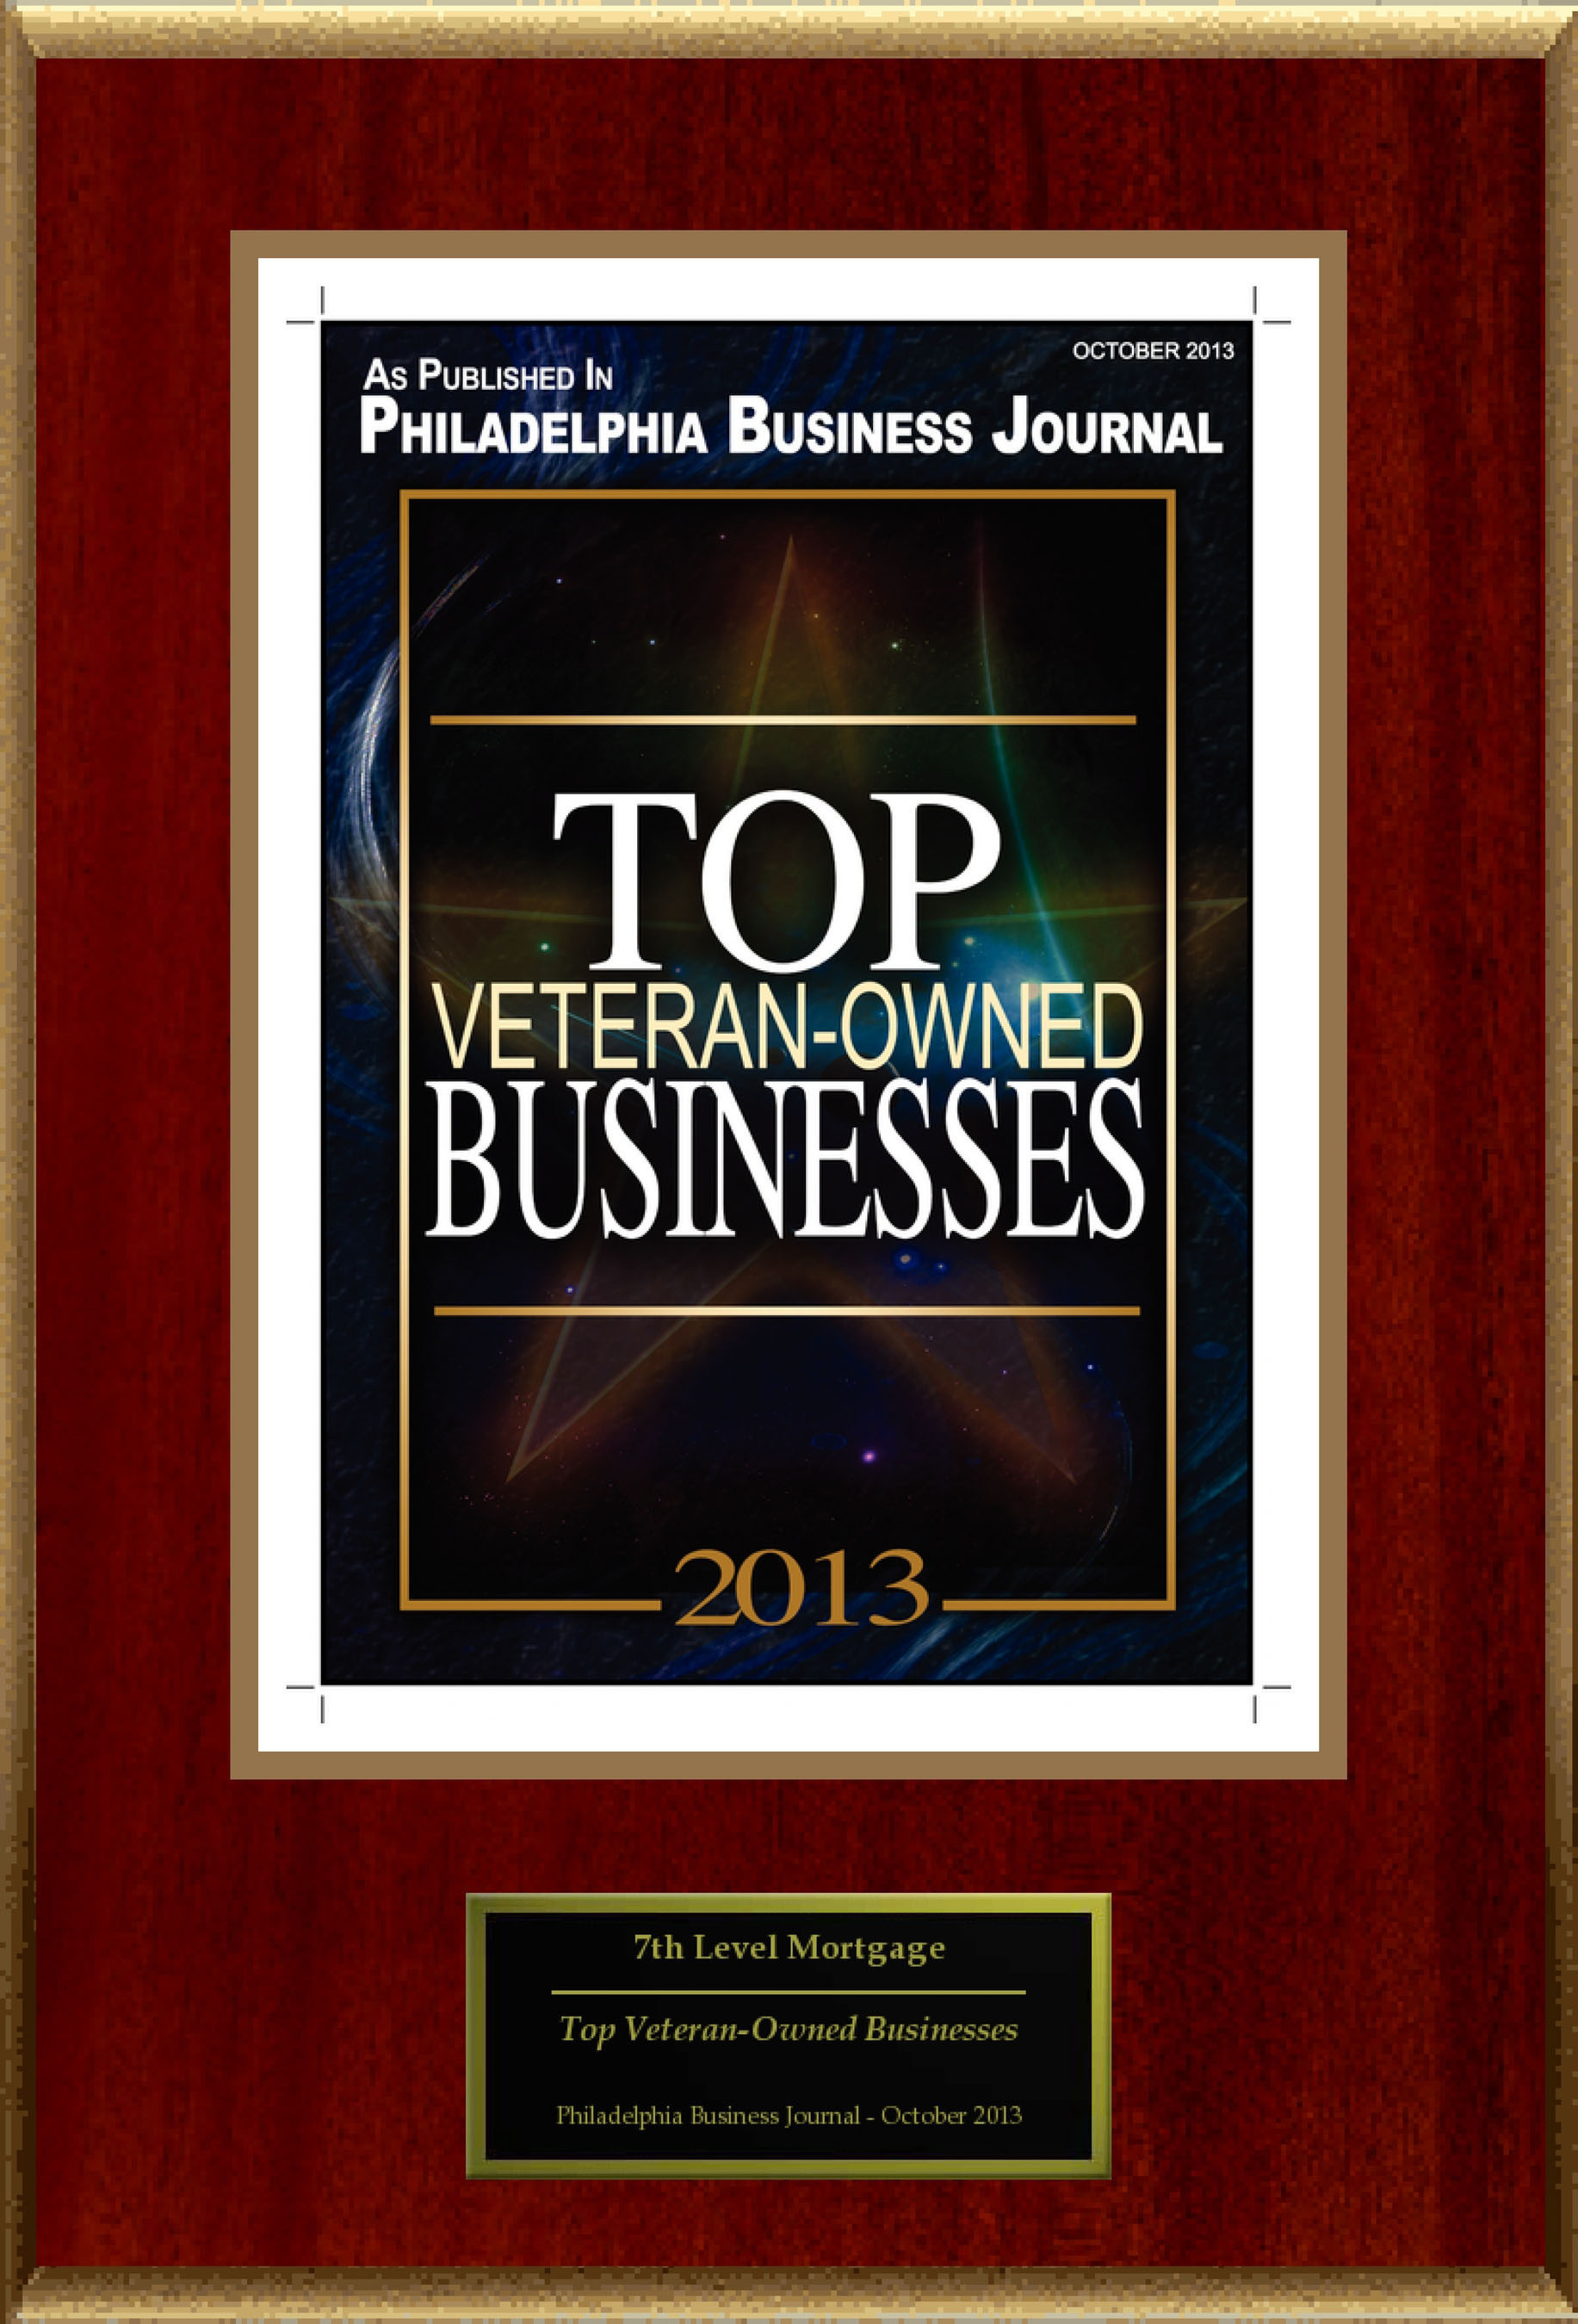 7th Level Mortgage LLC Selected For "Top Veteran-Owned Businesses". (PRNewsFoto/7th Level Mortgage LLC) (PRNewsFoto/7TH LEVEL MORTGAGE LLC)